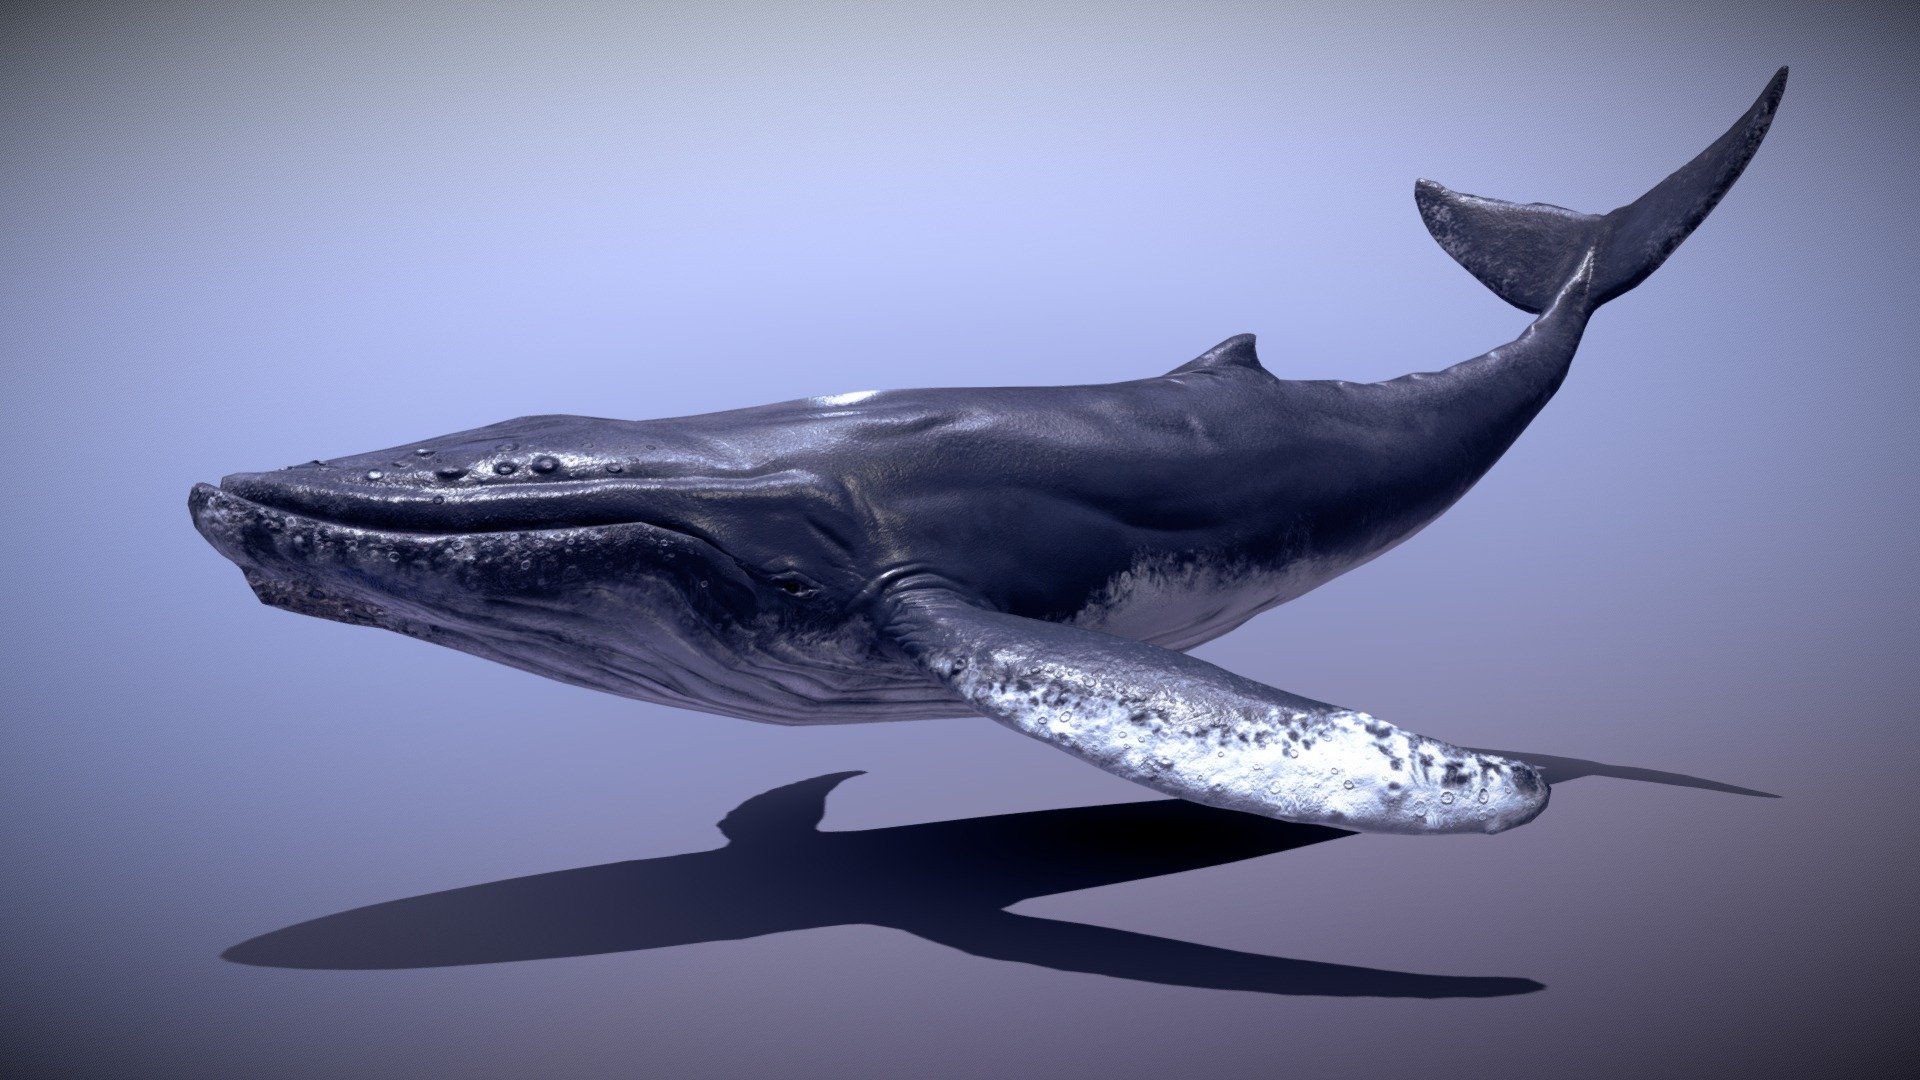 The Humpback whale 3d was made in blender 2.9 and painted in substance painter , is subdivison ready and have a clean topology , without subdivision it haves 5105 verts and with it, it haves 18262 verts , It is fully rigged with basic bones , it have a total of 7 animations : idle , swim1 ,swim 2 ,jump for left, right and straight and a mouth open one.

The texture have two variants one with dirty jaw spots and the other without it, comes with 4k, 2k and 1k textures for both variants : diffuse , normal , roughness (dry and wet)  ,height/displacement and AO maps  , baked normal map from a high poly model and place it in the low poly model , uv wrapped it manually .

Eyes and tongue , all is in one texture except for the barbs .

Comes with blend file and the textures attached in rar.

I did a remodel of this model go check it!
https://sketchfab.com/3d-models/humpback-whale-2a72200995344602a4daab15e8872766 - Humpback Whale Old - Buy Royalty Free 3D model by GoldenZtuff (@dhjwdwd) 3d model